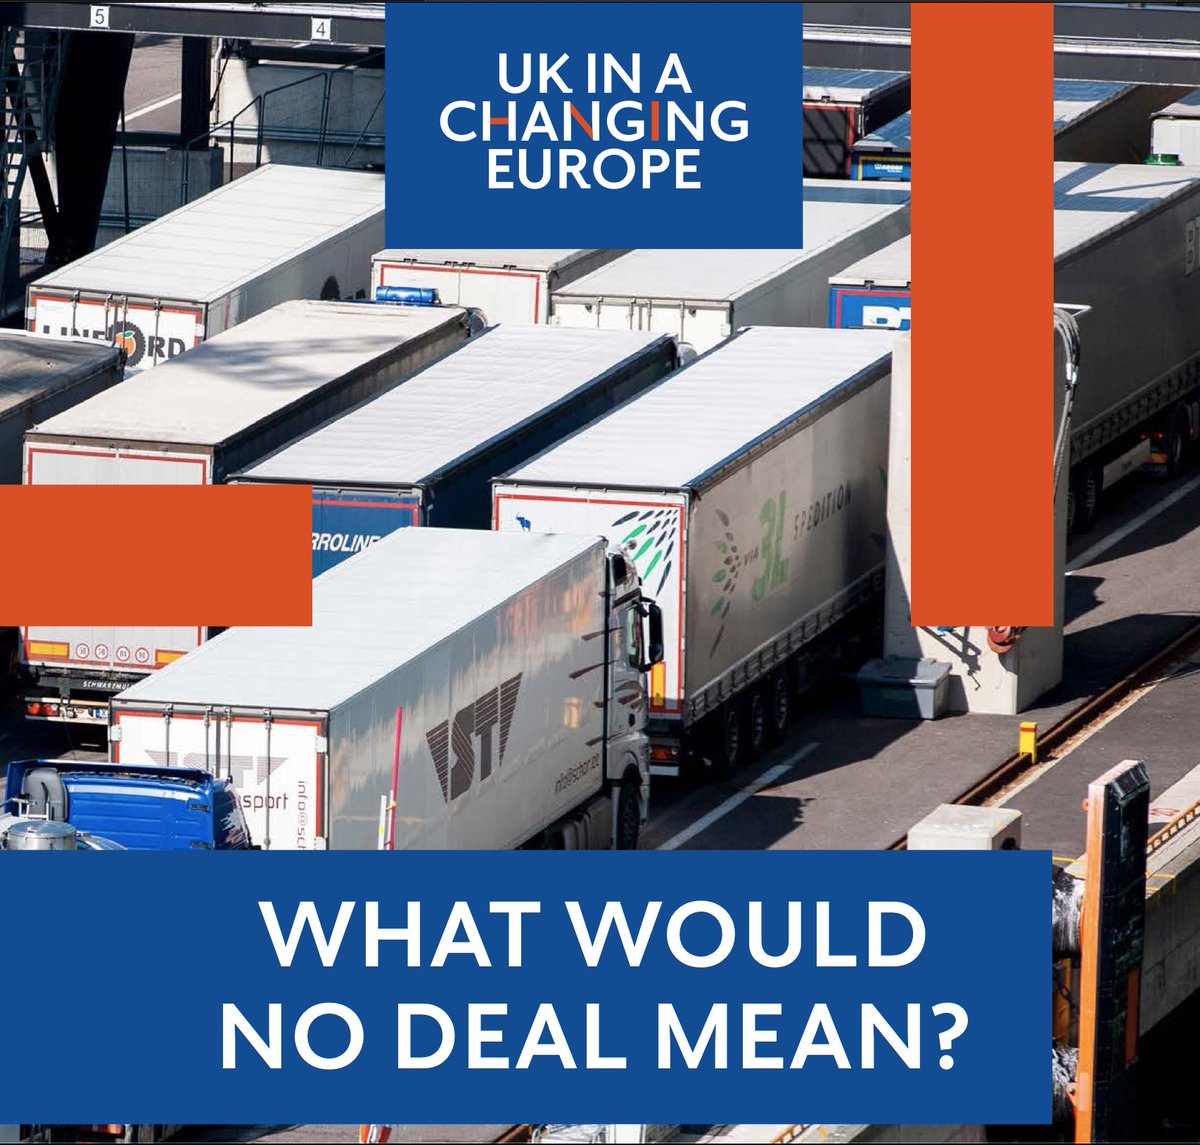 Just when you though life could get no better, YET ANOTHER  @UKandEU No Deal report comes out and proves you wrong. You can find it here (THREAD) 1/19  https://ukandeu.ac.uk/wp-content/uploads/2020/09/UKICE-What-would-no-deal-mean.pdf